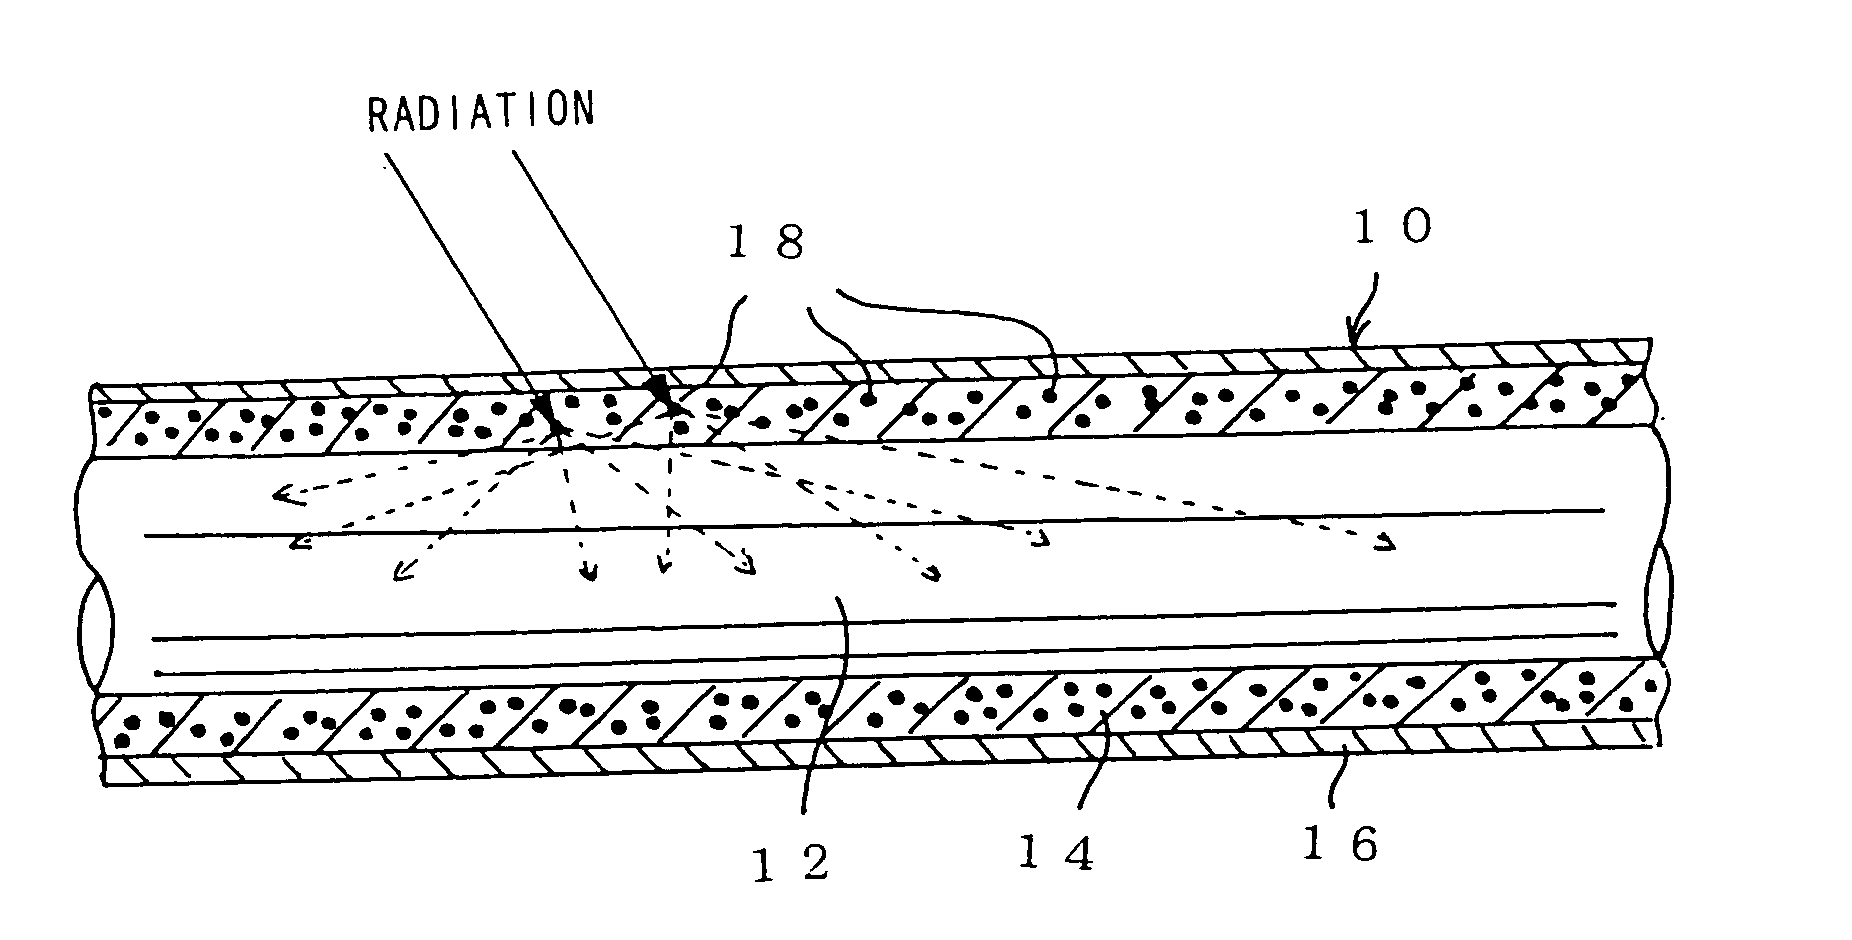 Optical fiber, optical fiber cable, and radiation detecting system using such